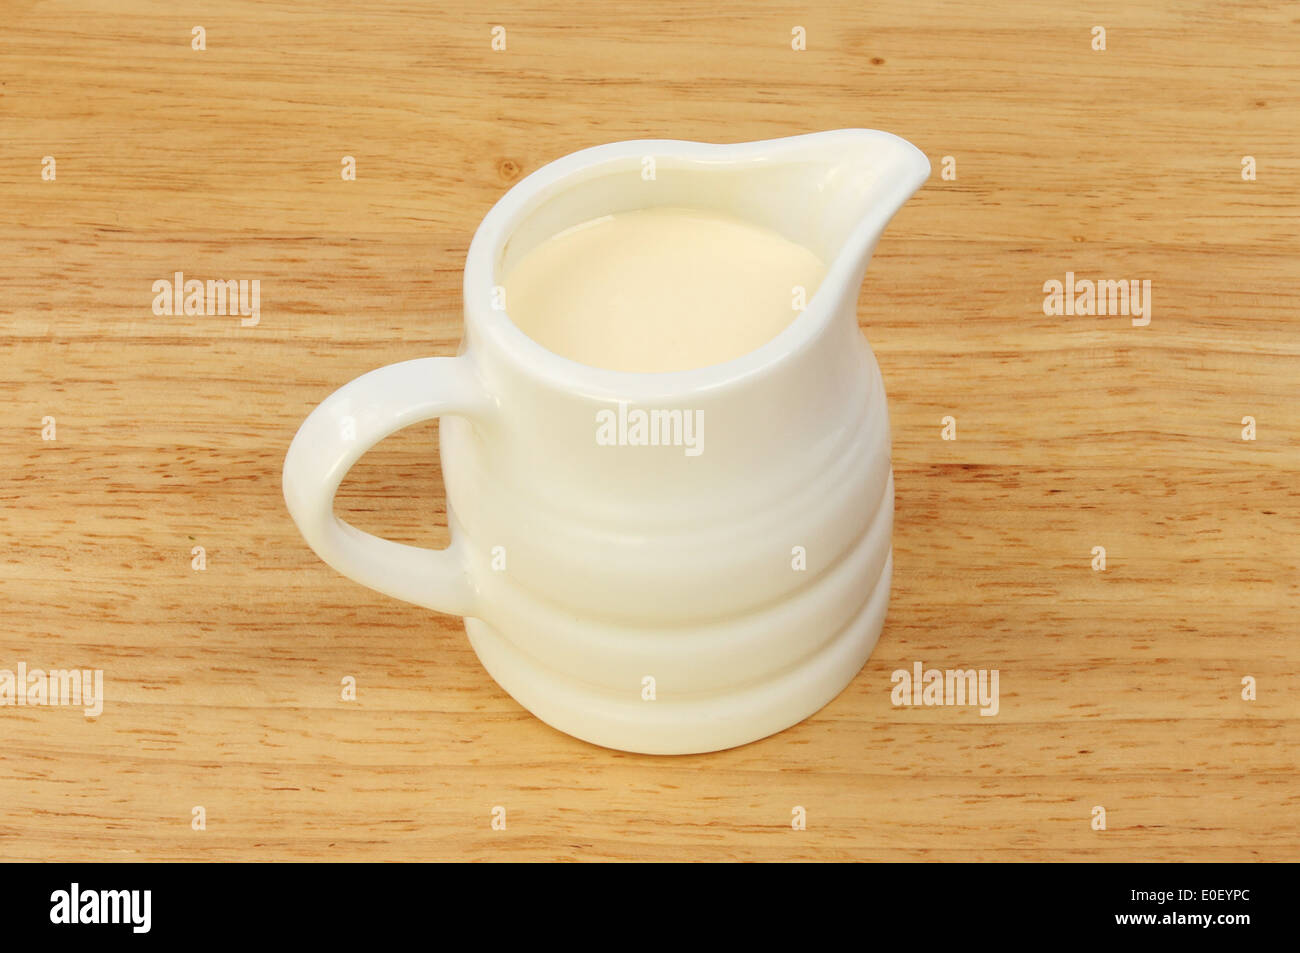 Jug of cream on a wooden board Stock Photo